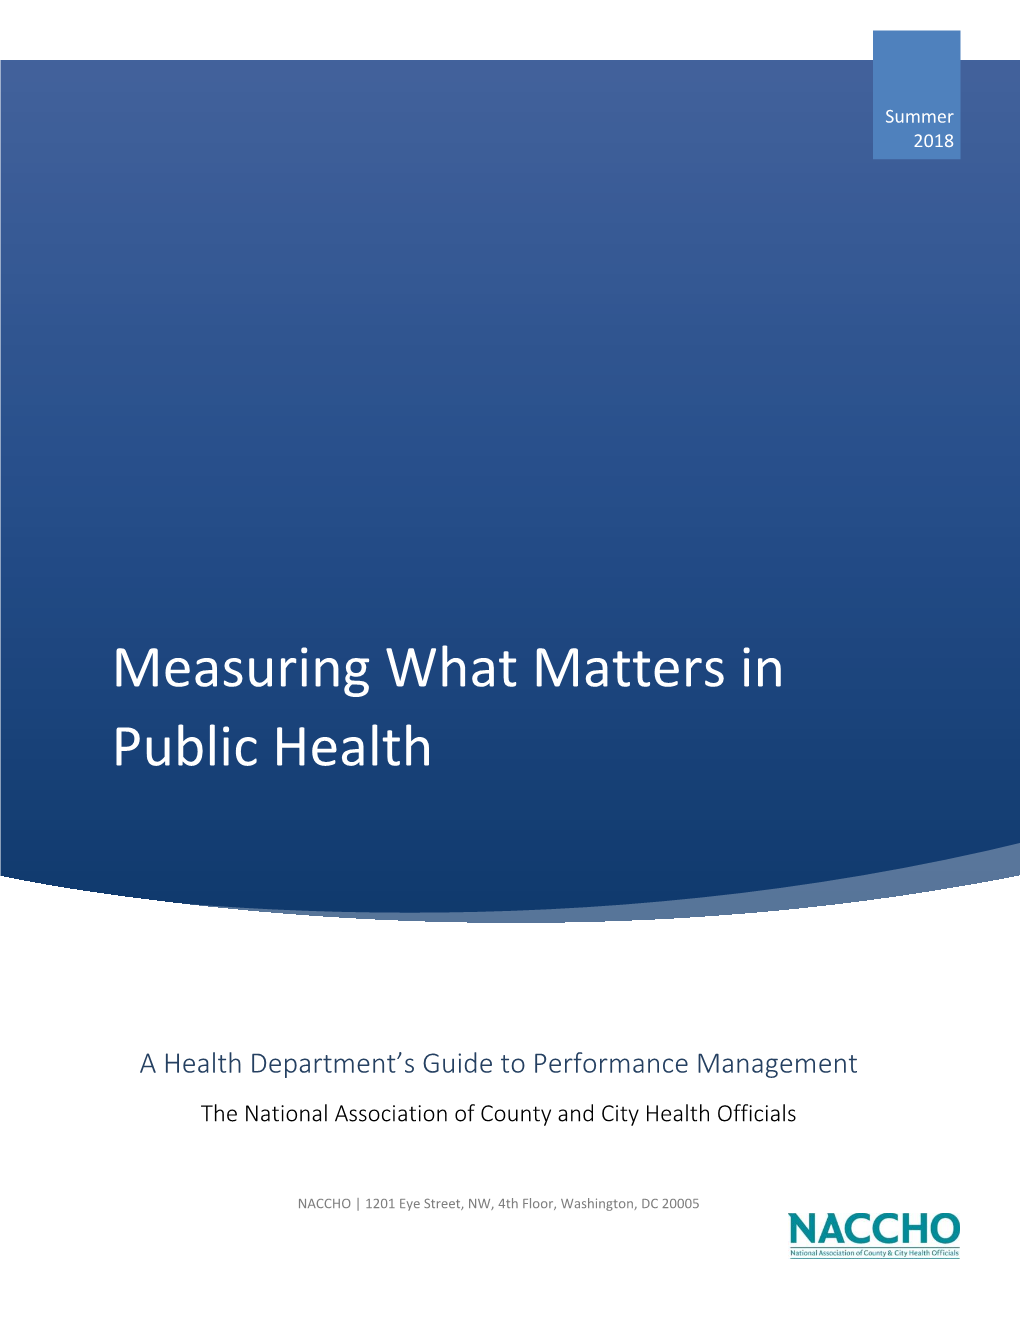 Measuring What Matters in Public Health